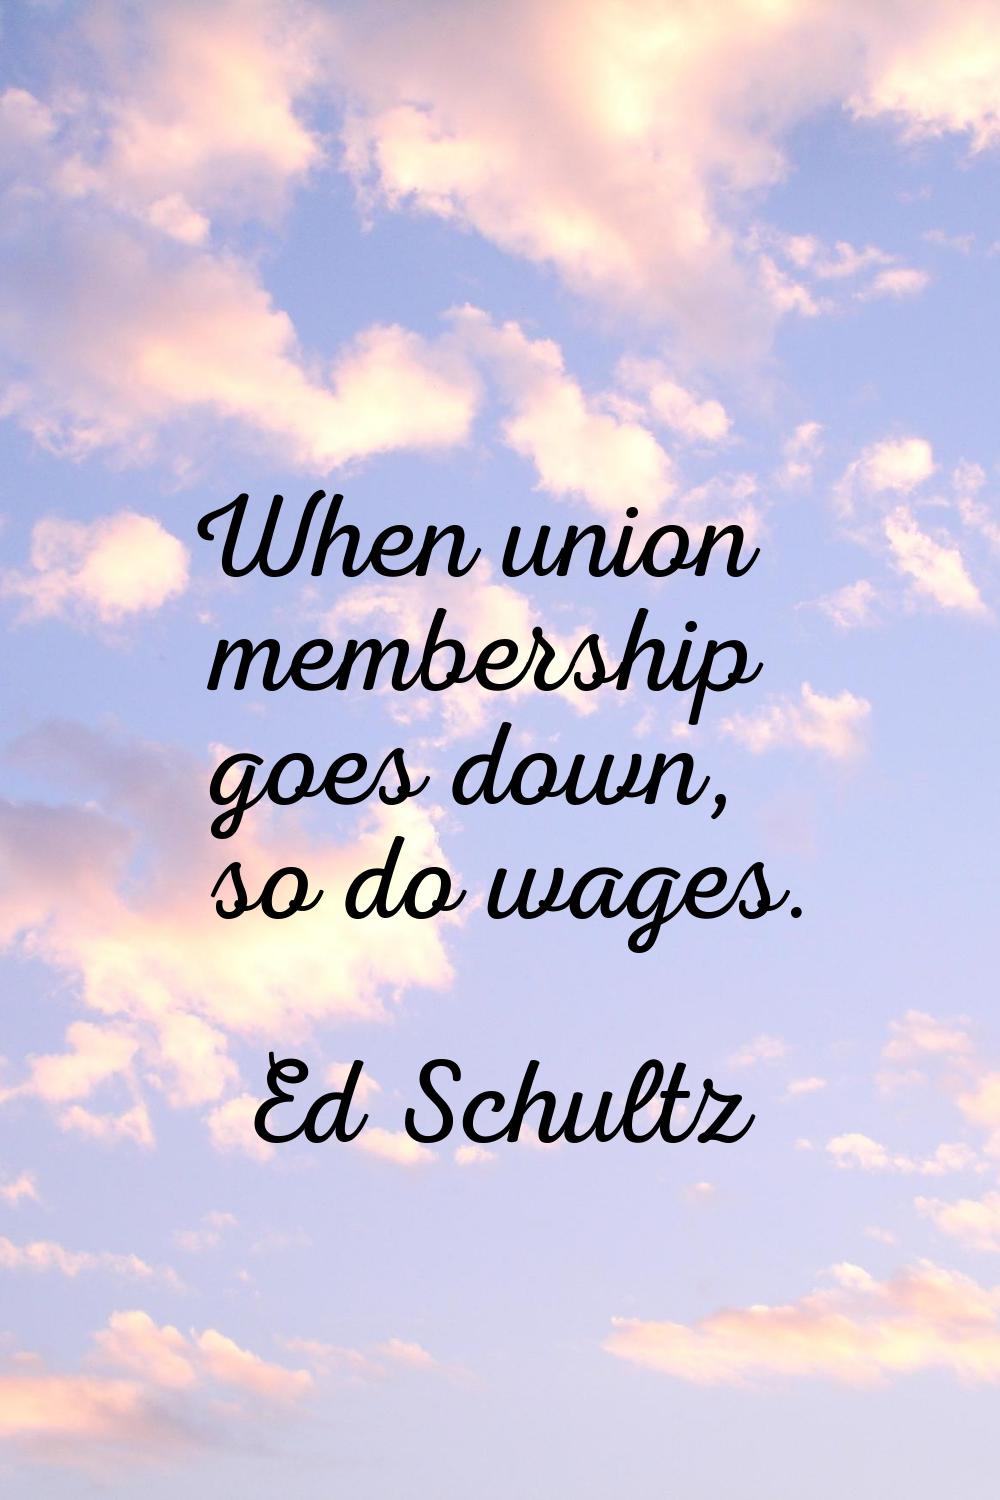 When union membership goes down, so do wages.